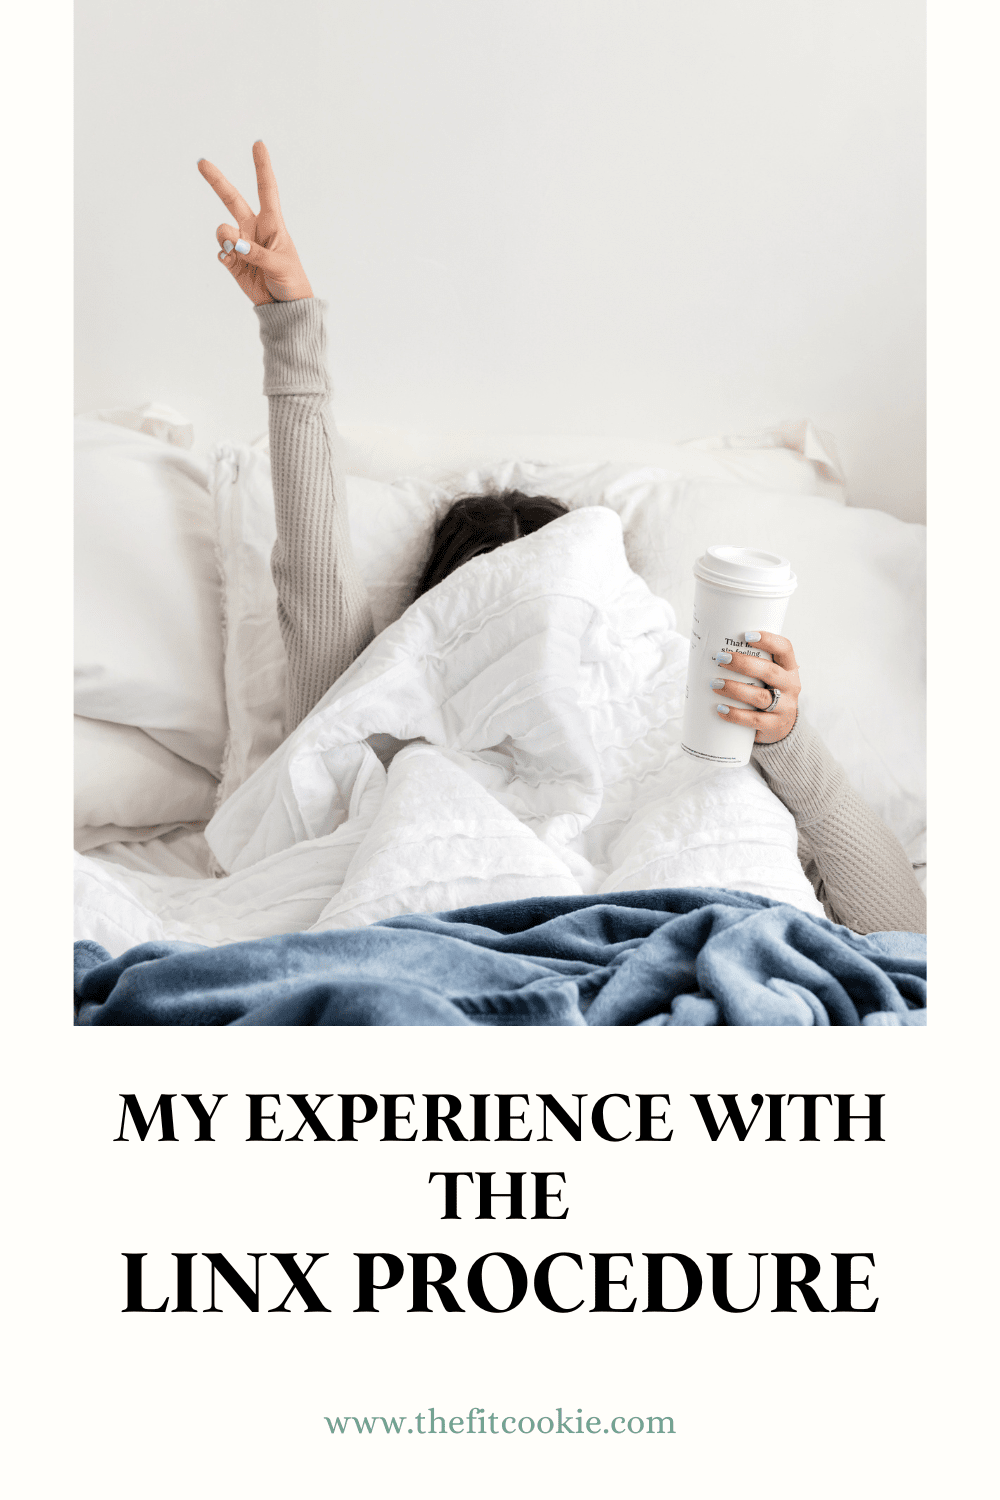 photo of woman in bed holding a peace sign up with her fingers. Image has text overlay that says "my experience with the linx procedure".